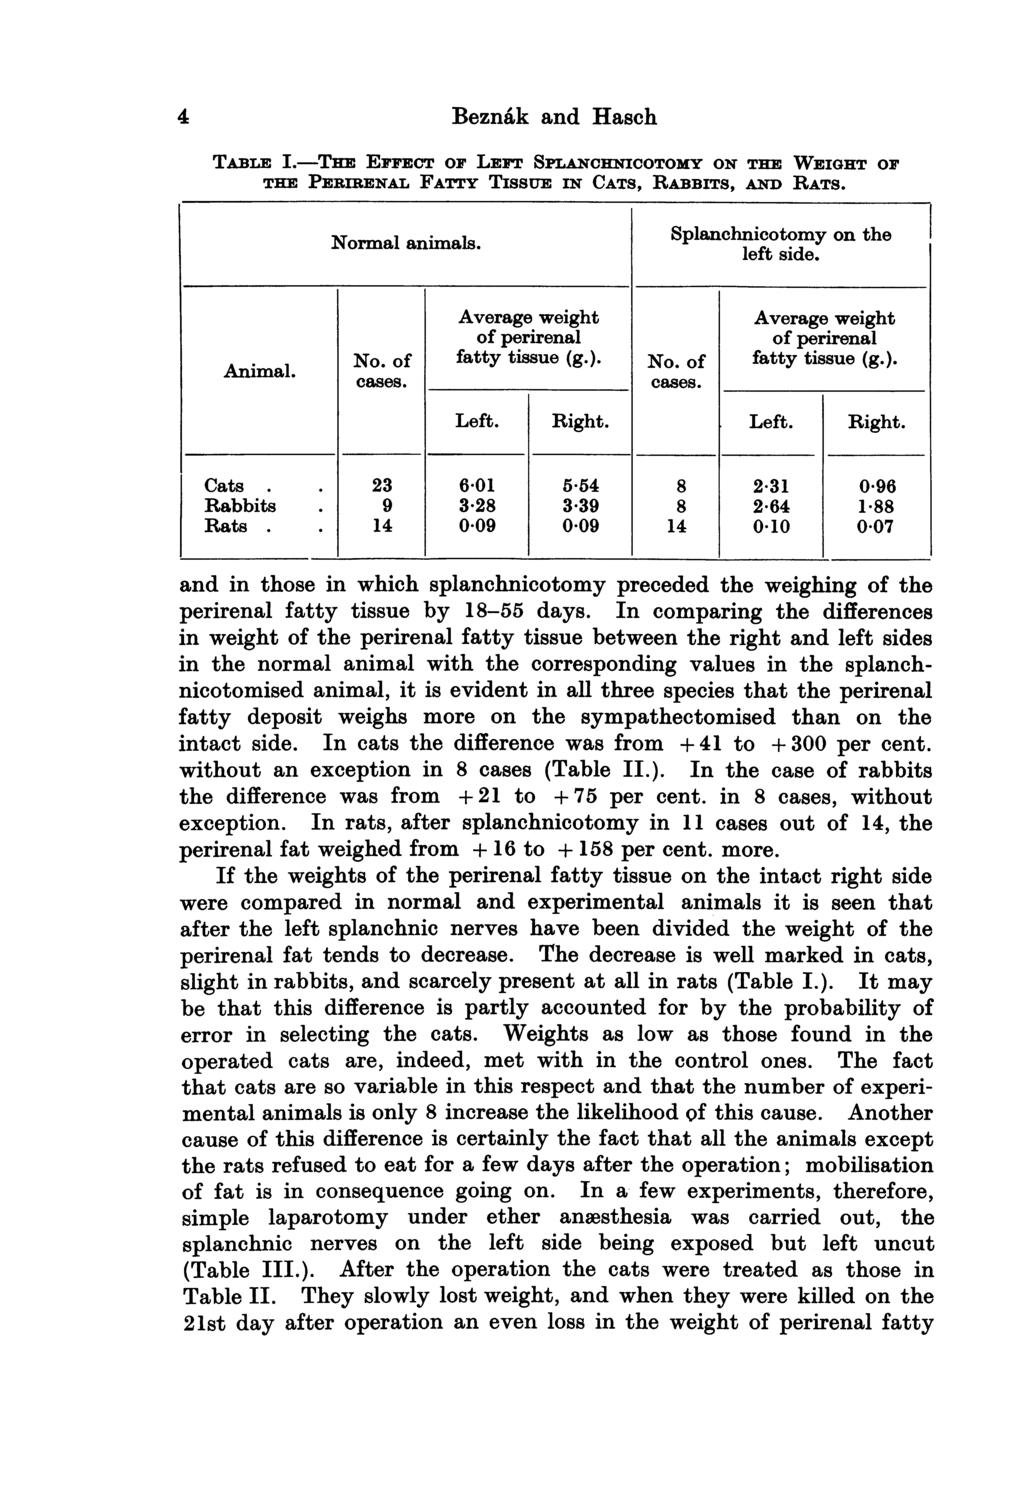 4 Beznak and Hasch TABLE I.-THE EFFECT OF LEFT SPLANCHNICOTOMY ON THE WEIGHT OF THE PERIRENAL FATTY TISSUE IN CATS, RABBITS, AND RATS. Normal animals. Splanchnicotomy on the left side.